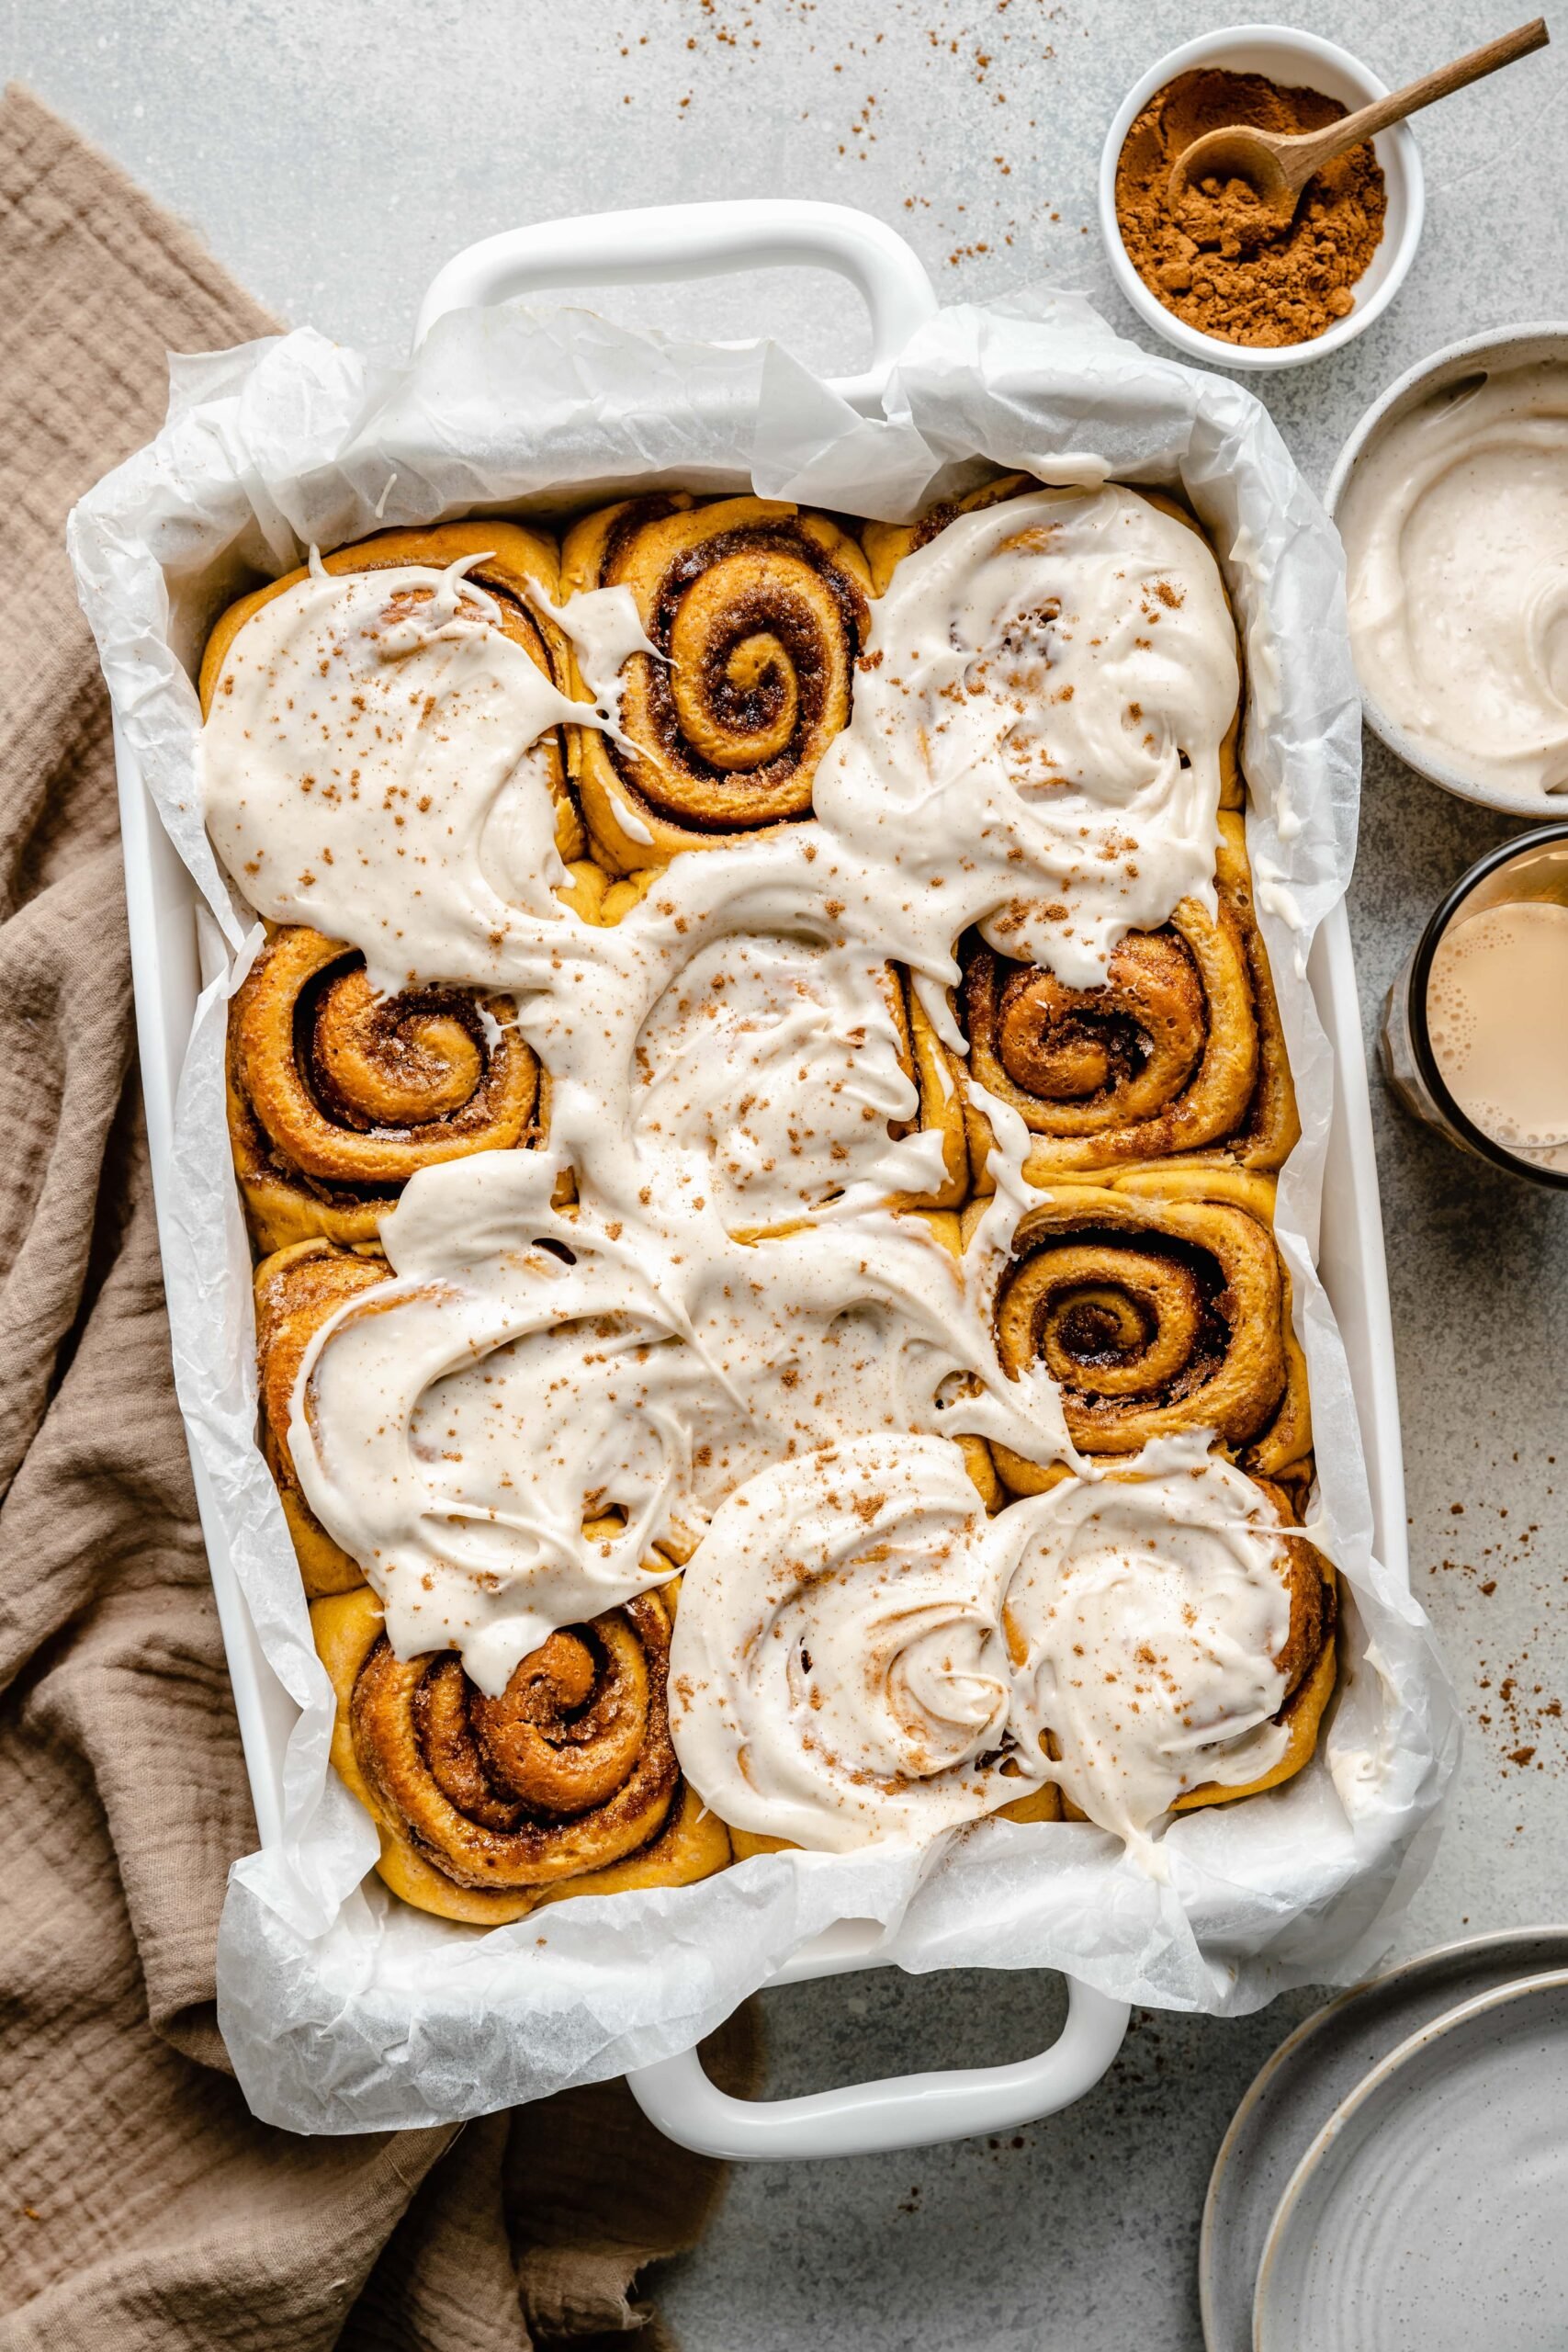 https://allthehealthythings.com/wp-content/uploads/2022/06/Pumpkin-Cinnamon-Rolls-10-scaled.jpg